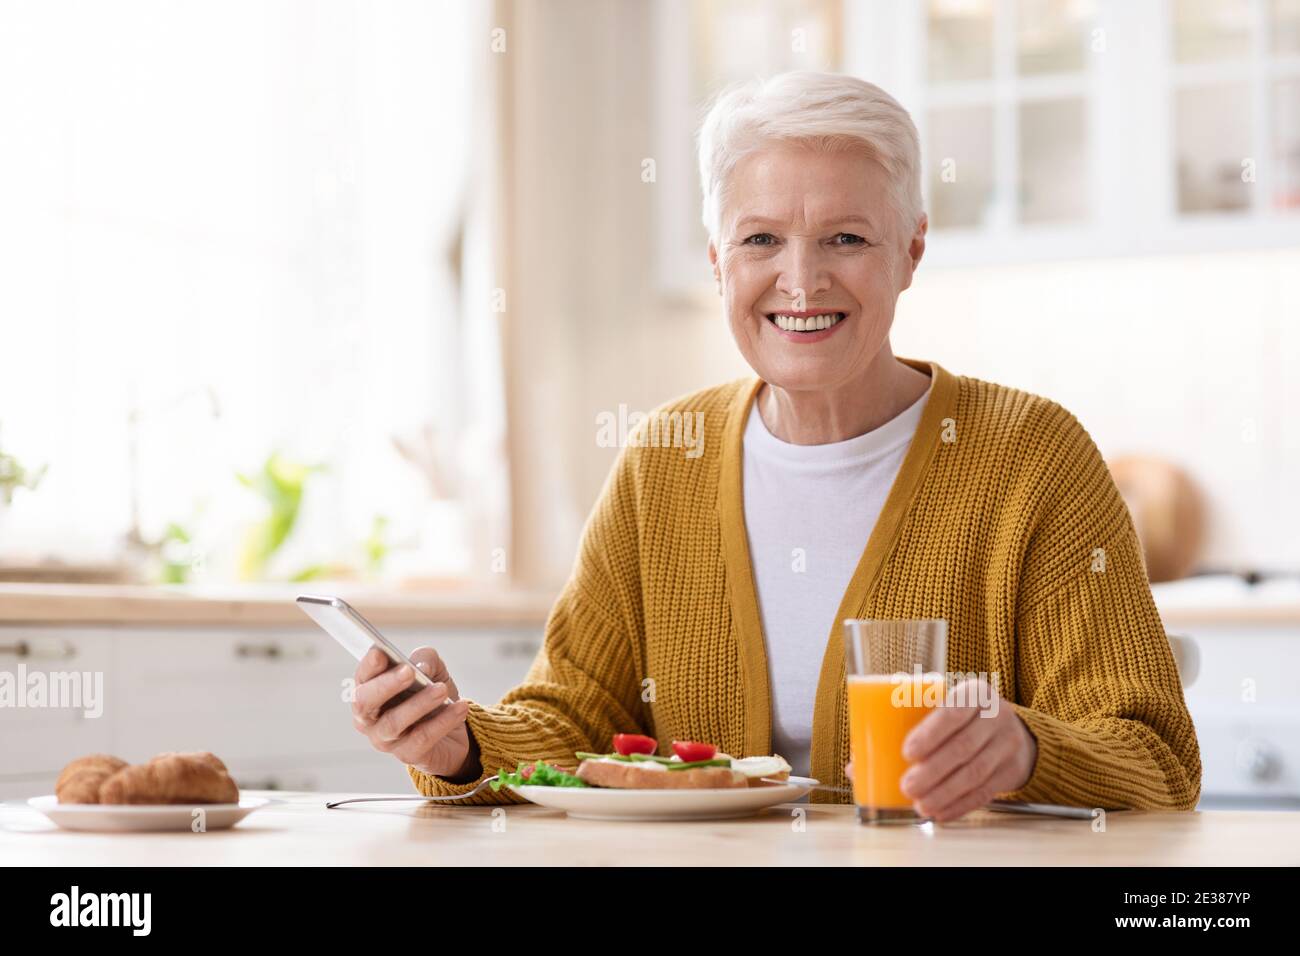 Smiling old lady using mobile phone while having lunch Stock Photo